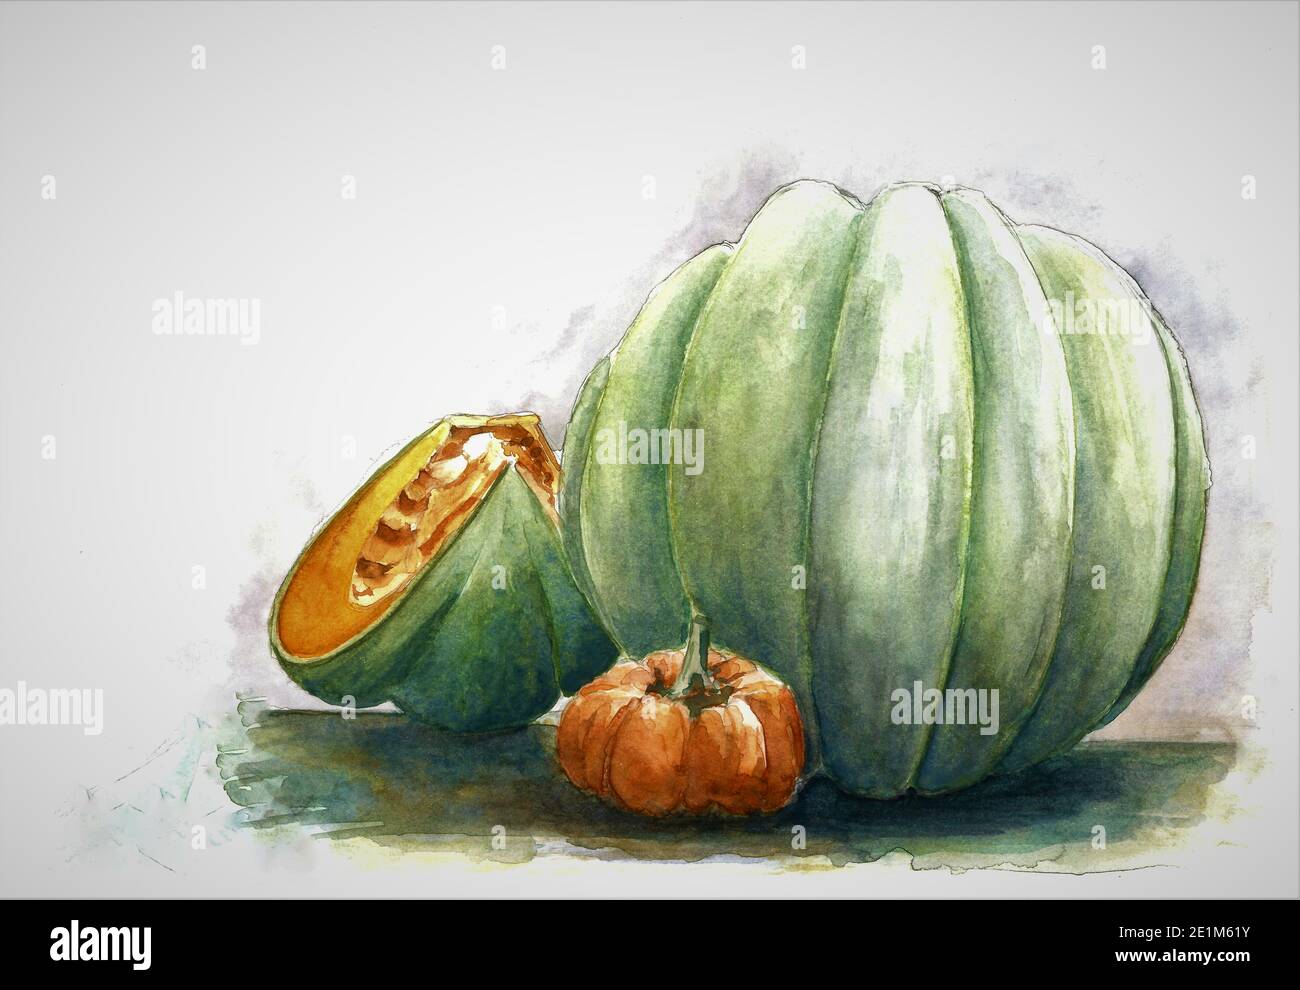 Pumpkins. Green and orange pumpkin painting. Hand drawn watercolour painting on white background. Art work. Painted by the photographer. Stock Photo